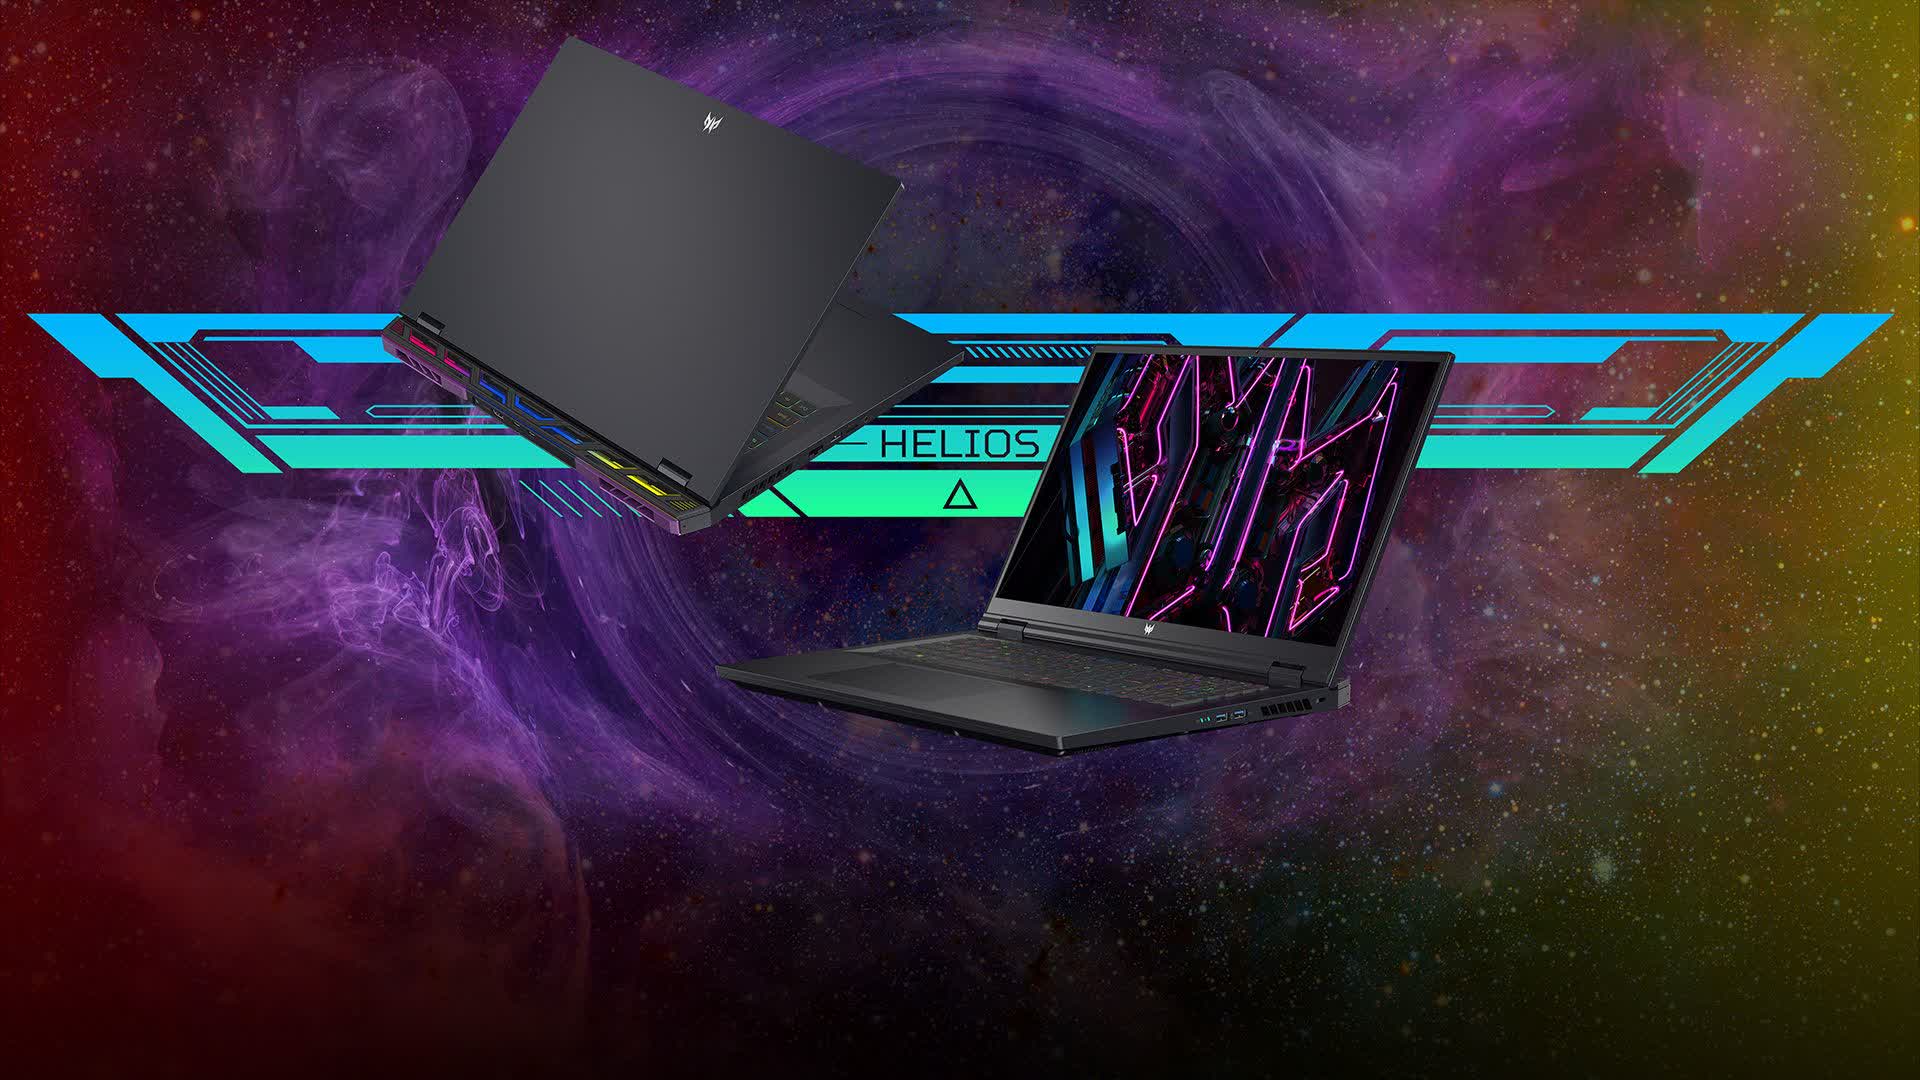 Size matters: Alienware, Razer, and Acer reveal new 18-inch laptops with RTX 40-series GPUs